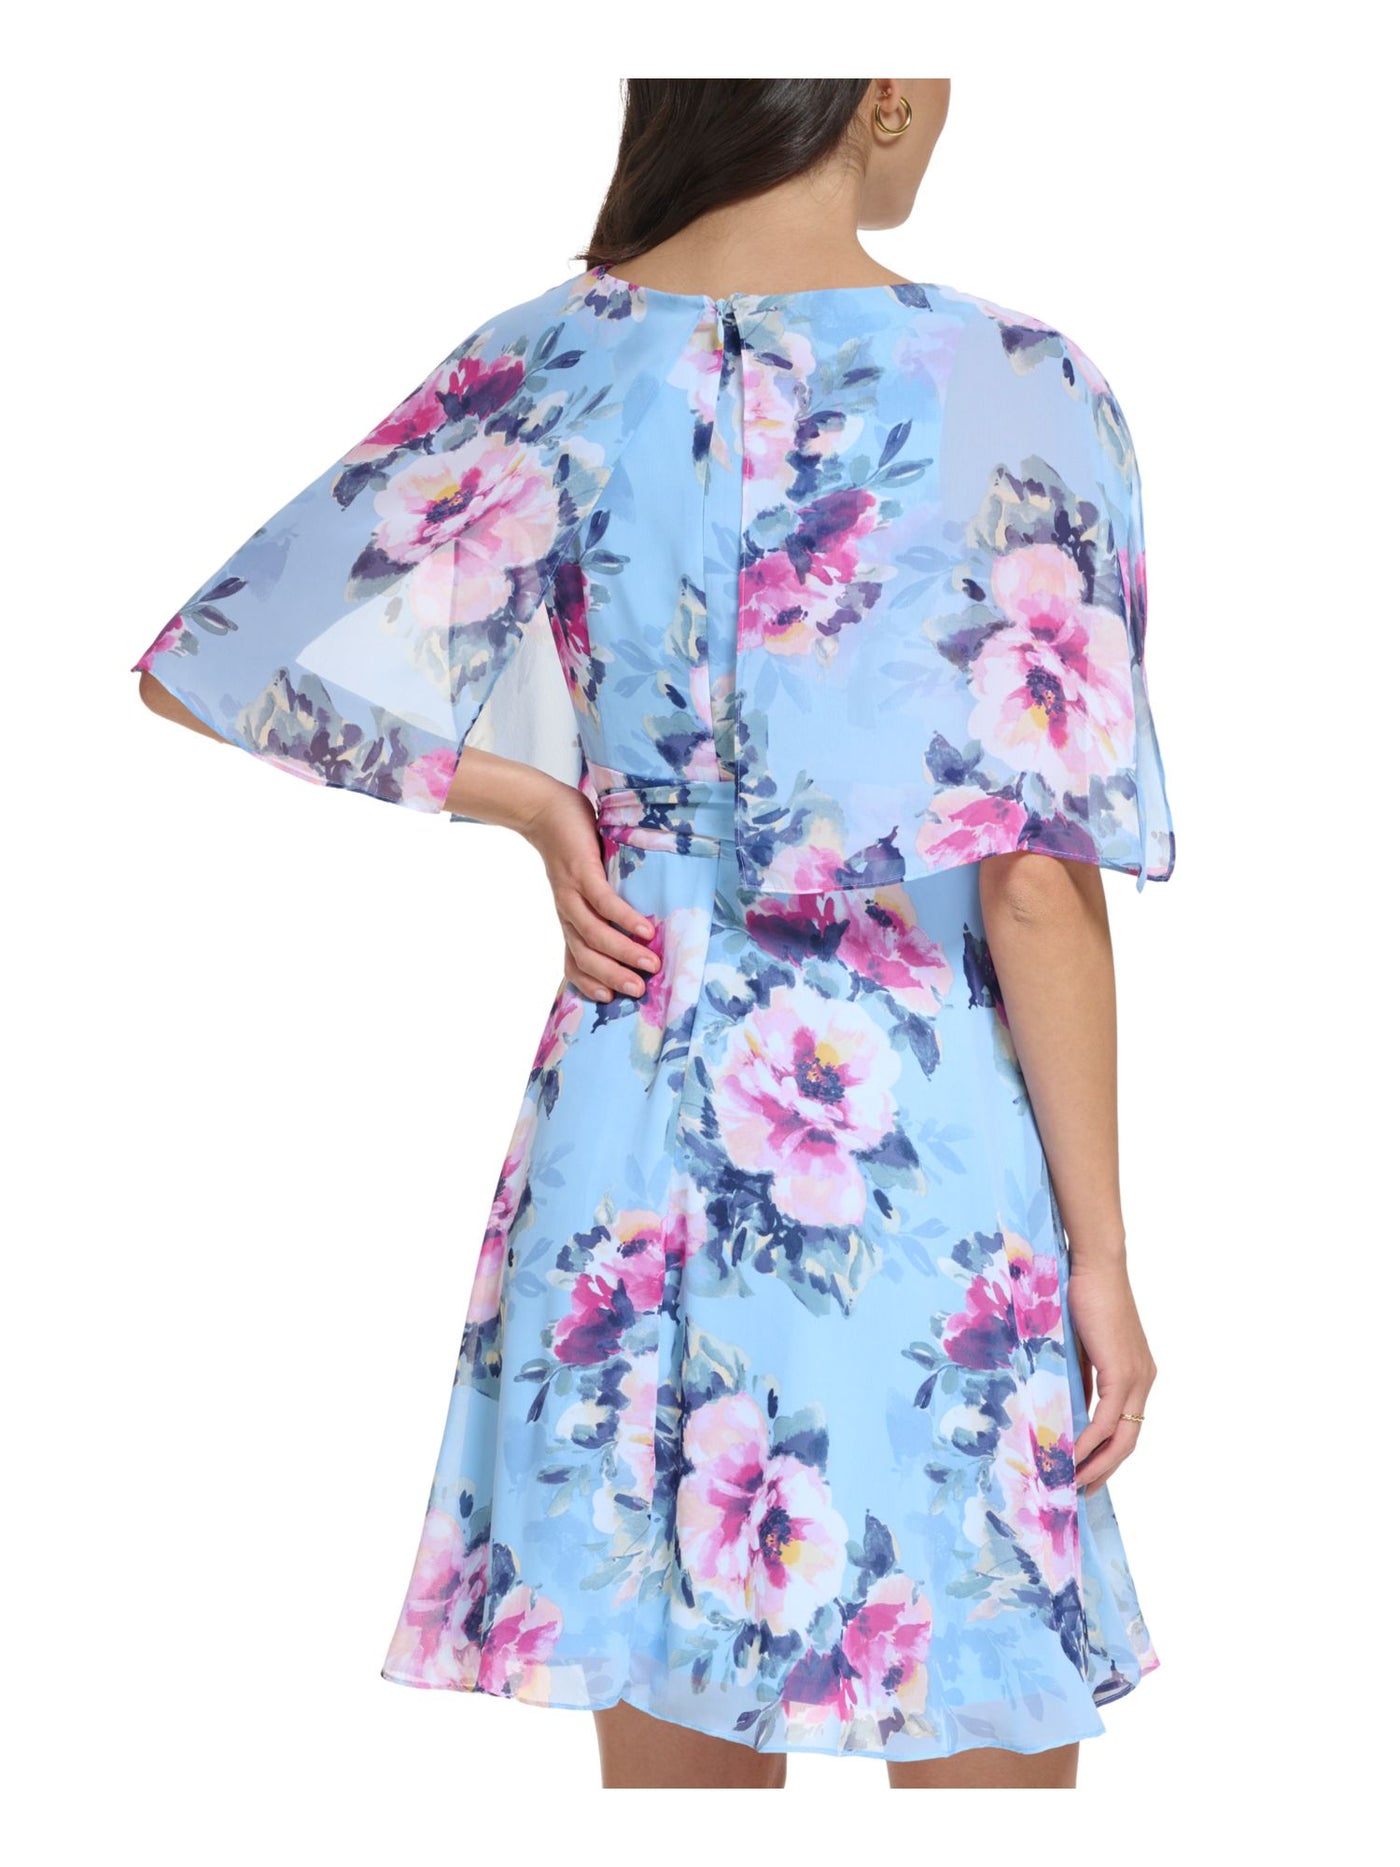 JESSICA HOWARD Womens Light Blue Zippered Belted Sheer Overlay Lined Floral Flutter Sleeve Boat Neck Above The Knee Party Fit + Flare Dress Petites 10P